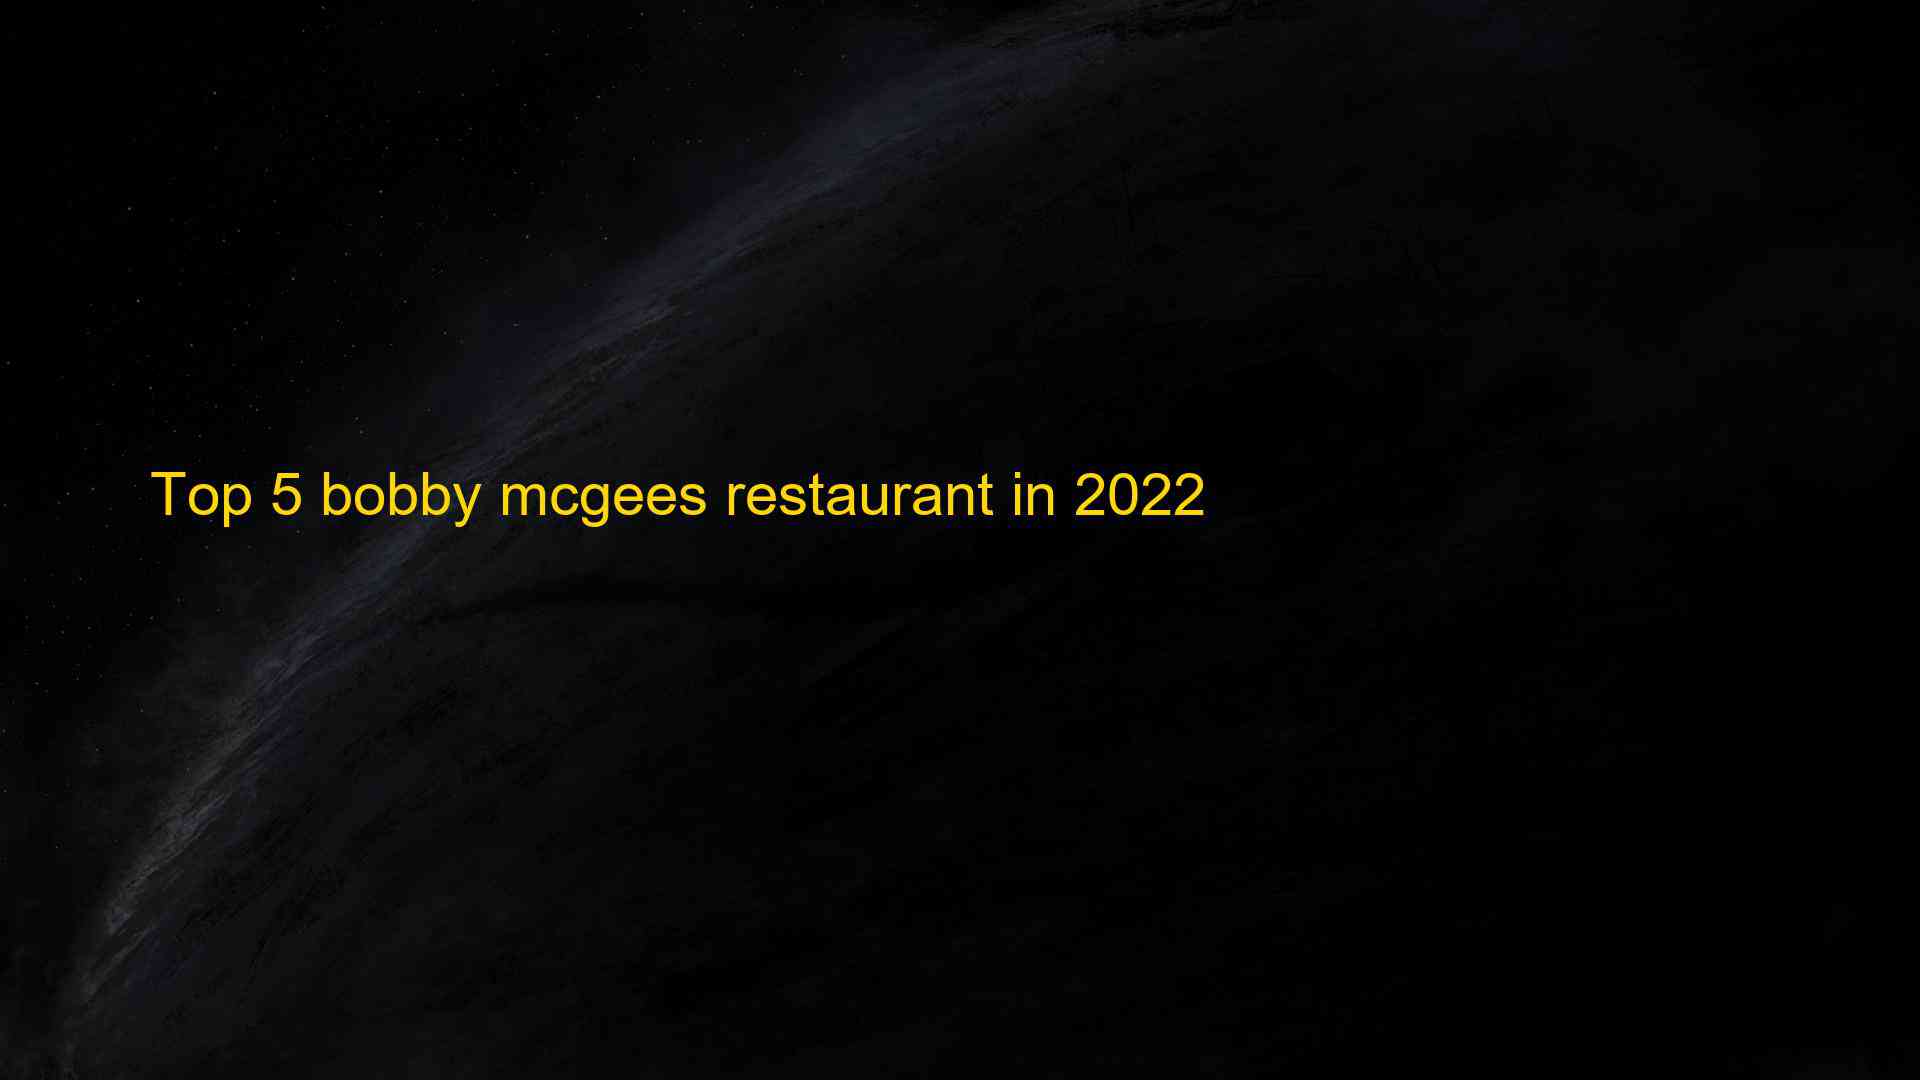 Top 5 bobby mcgees restaurant in 2022 1663178893